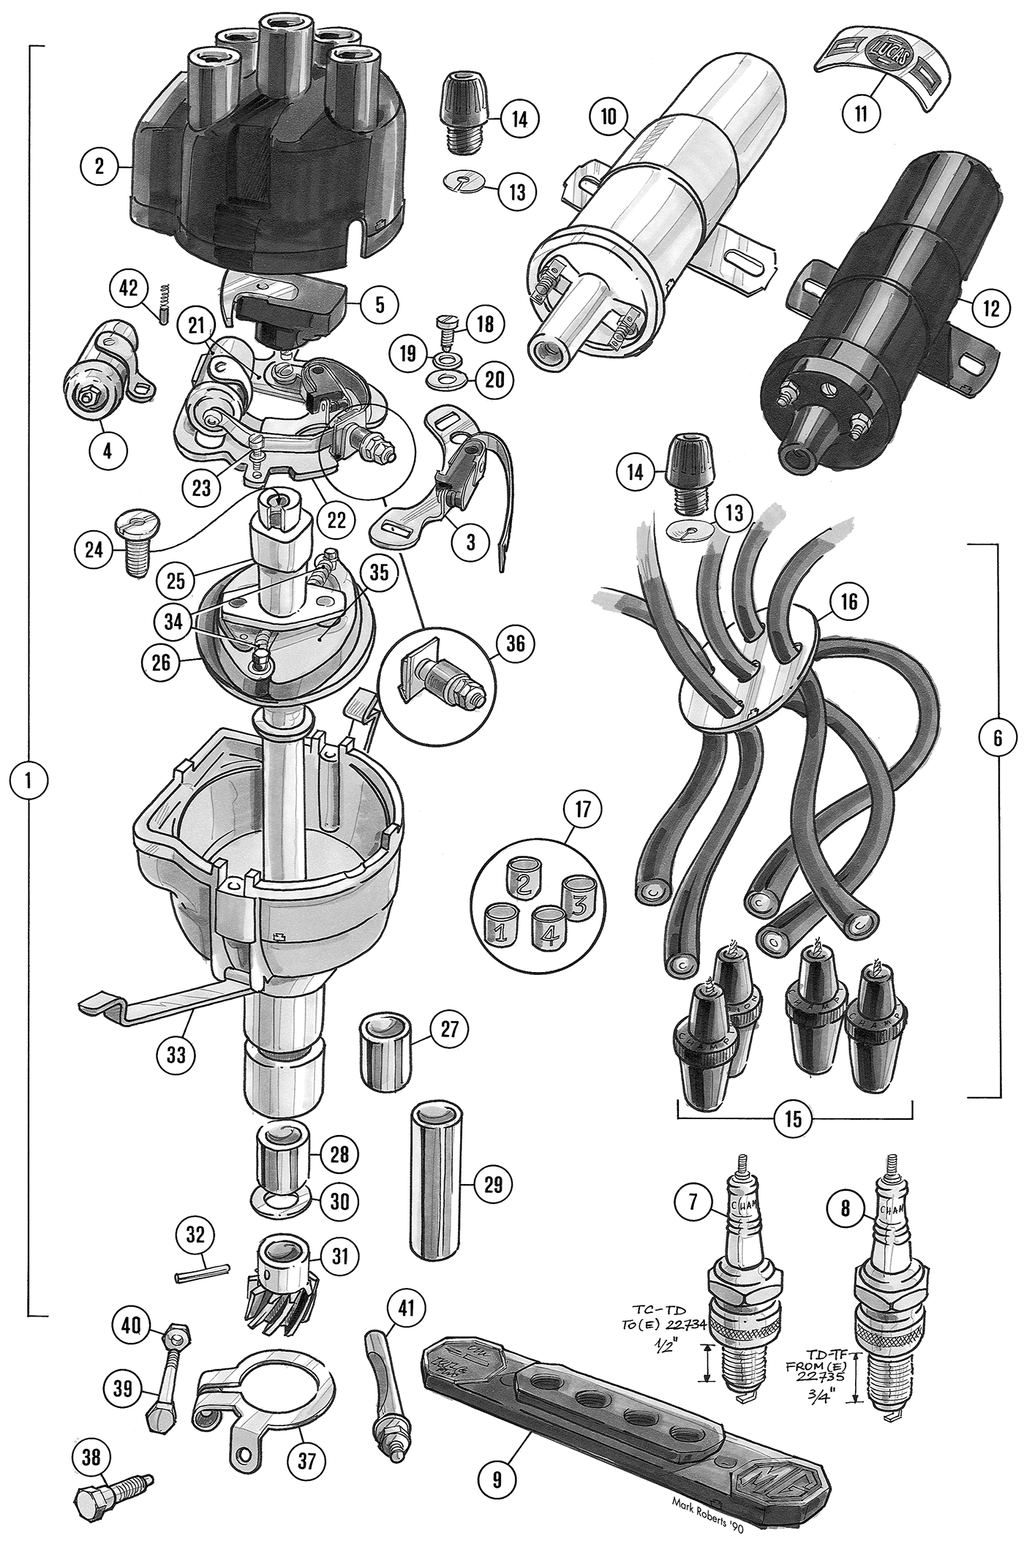 MGTD-TF 1949-1955 - Ignition coils & modules - 1